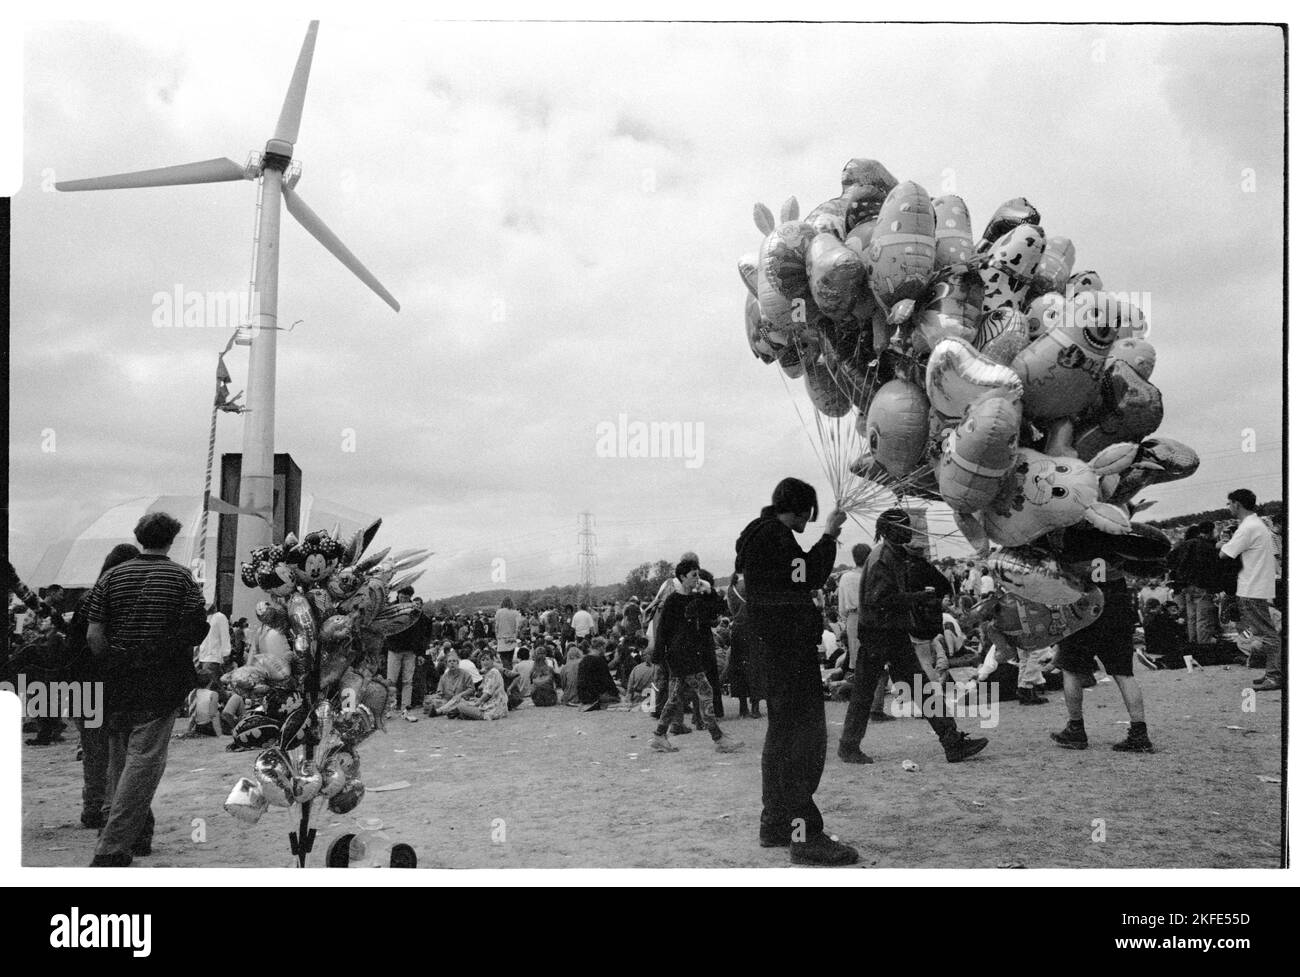 Balloon seller at the Main Stage and field at Glastonbury, 24-26 June 1994. There was no Pyramid Stage that year following a fire. This was also the first year a turbine was erected to supply power to the event. Photograph © Rob Watkins Stock Photo